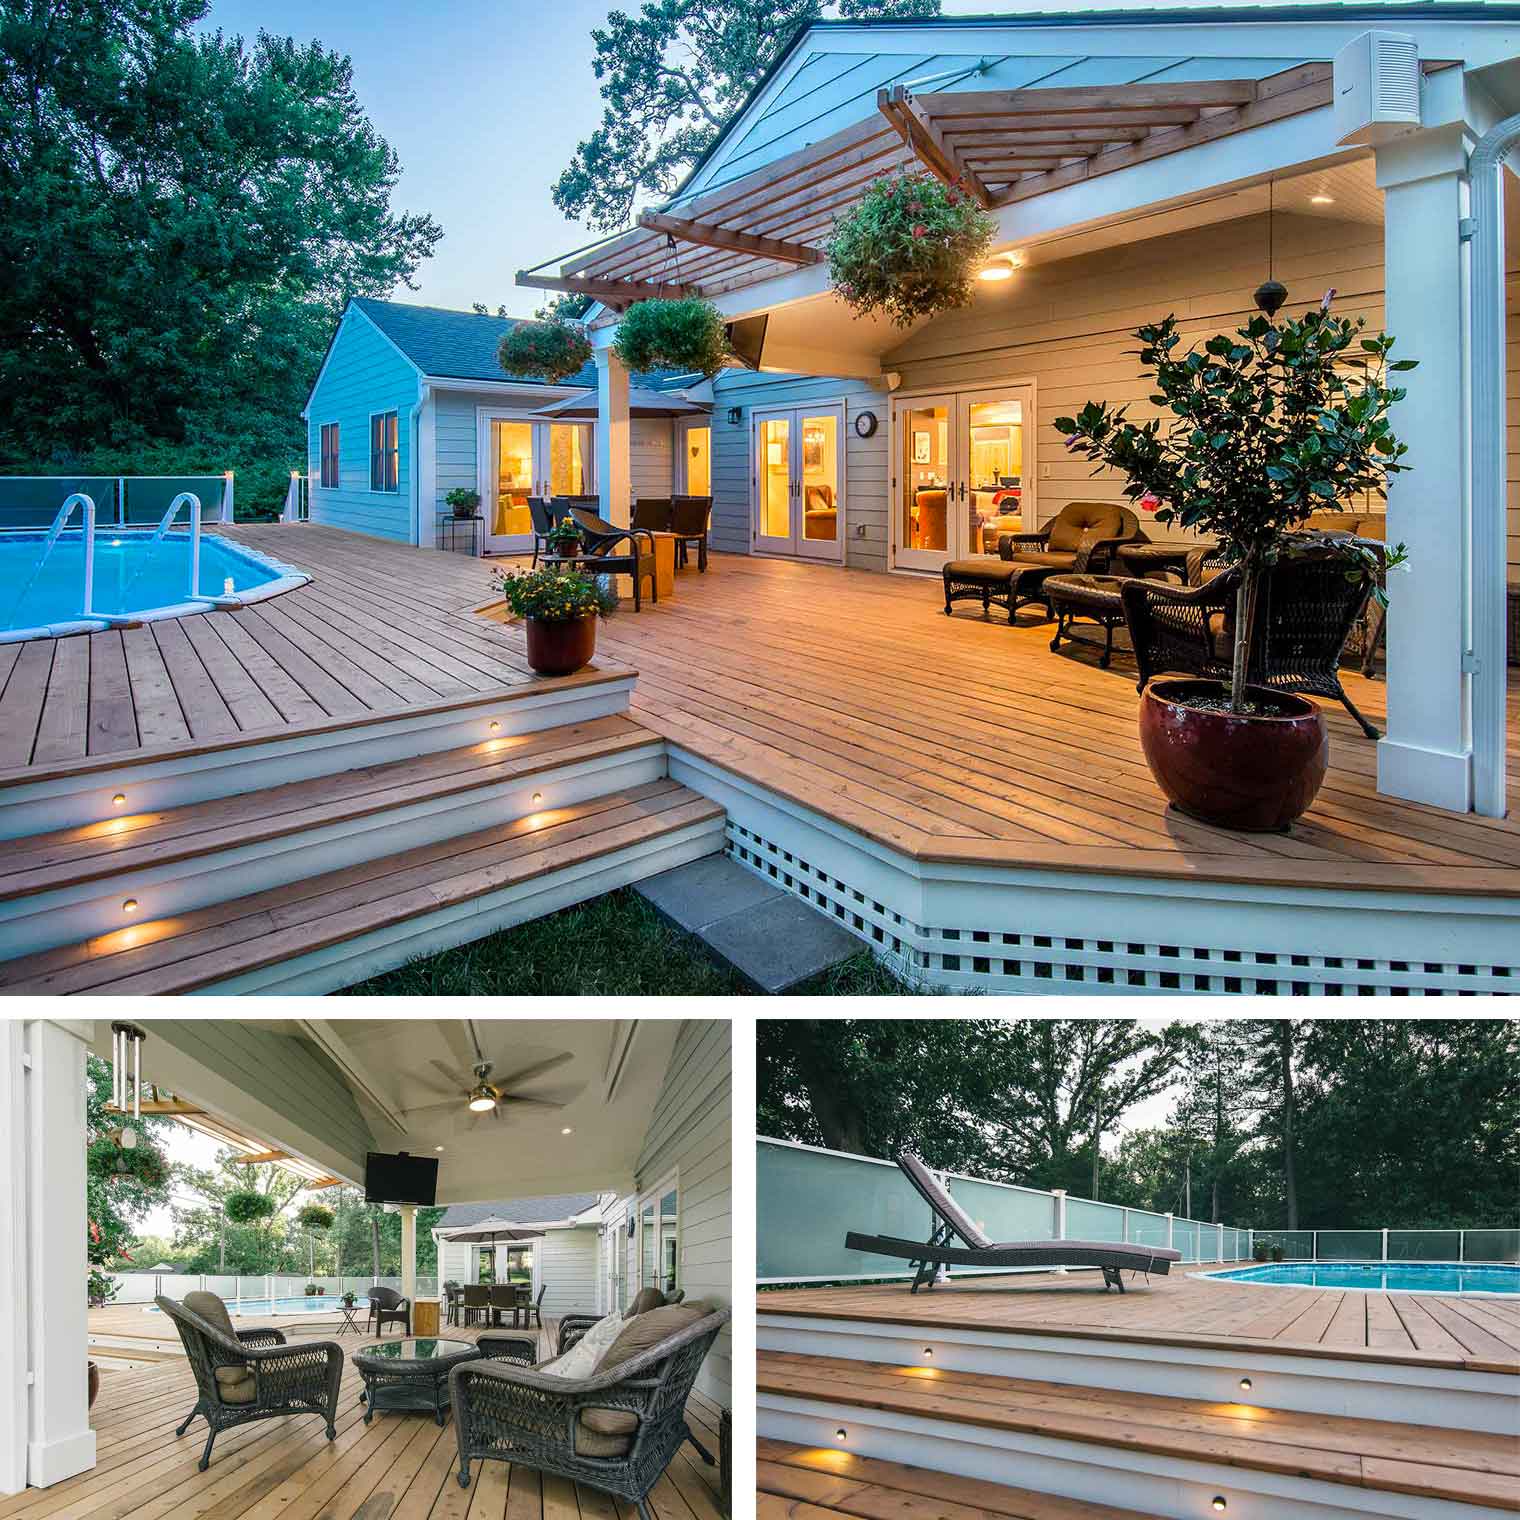 Silent Rivers projects 2017_midcentury Des Moines home has outdoor backyard patio deck and pool remodeled by Silent Rivers